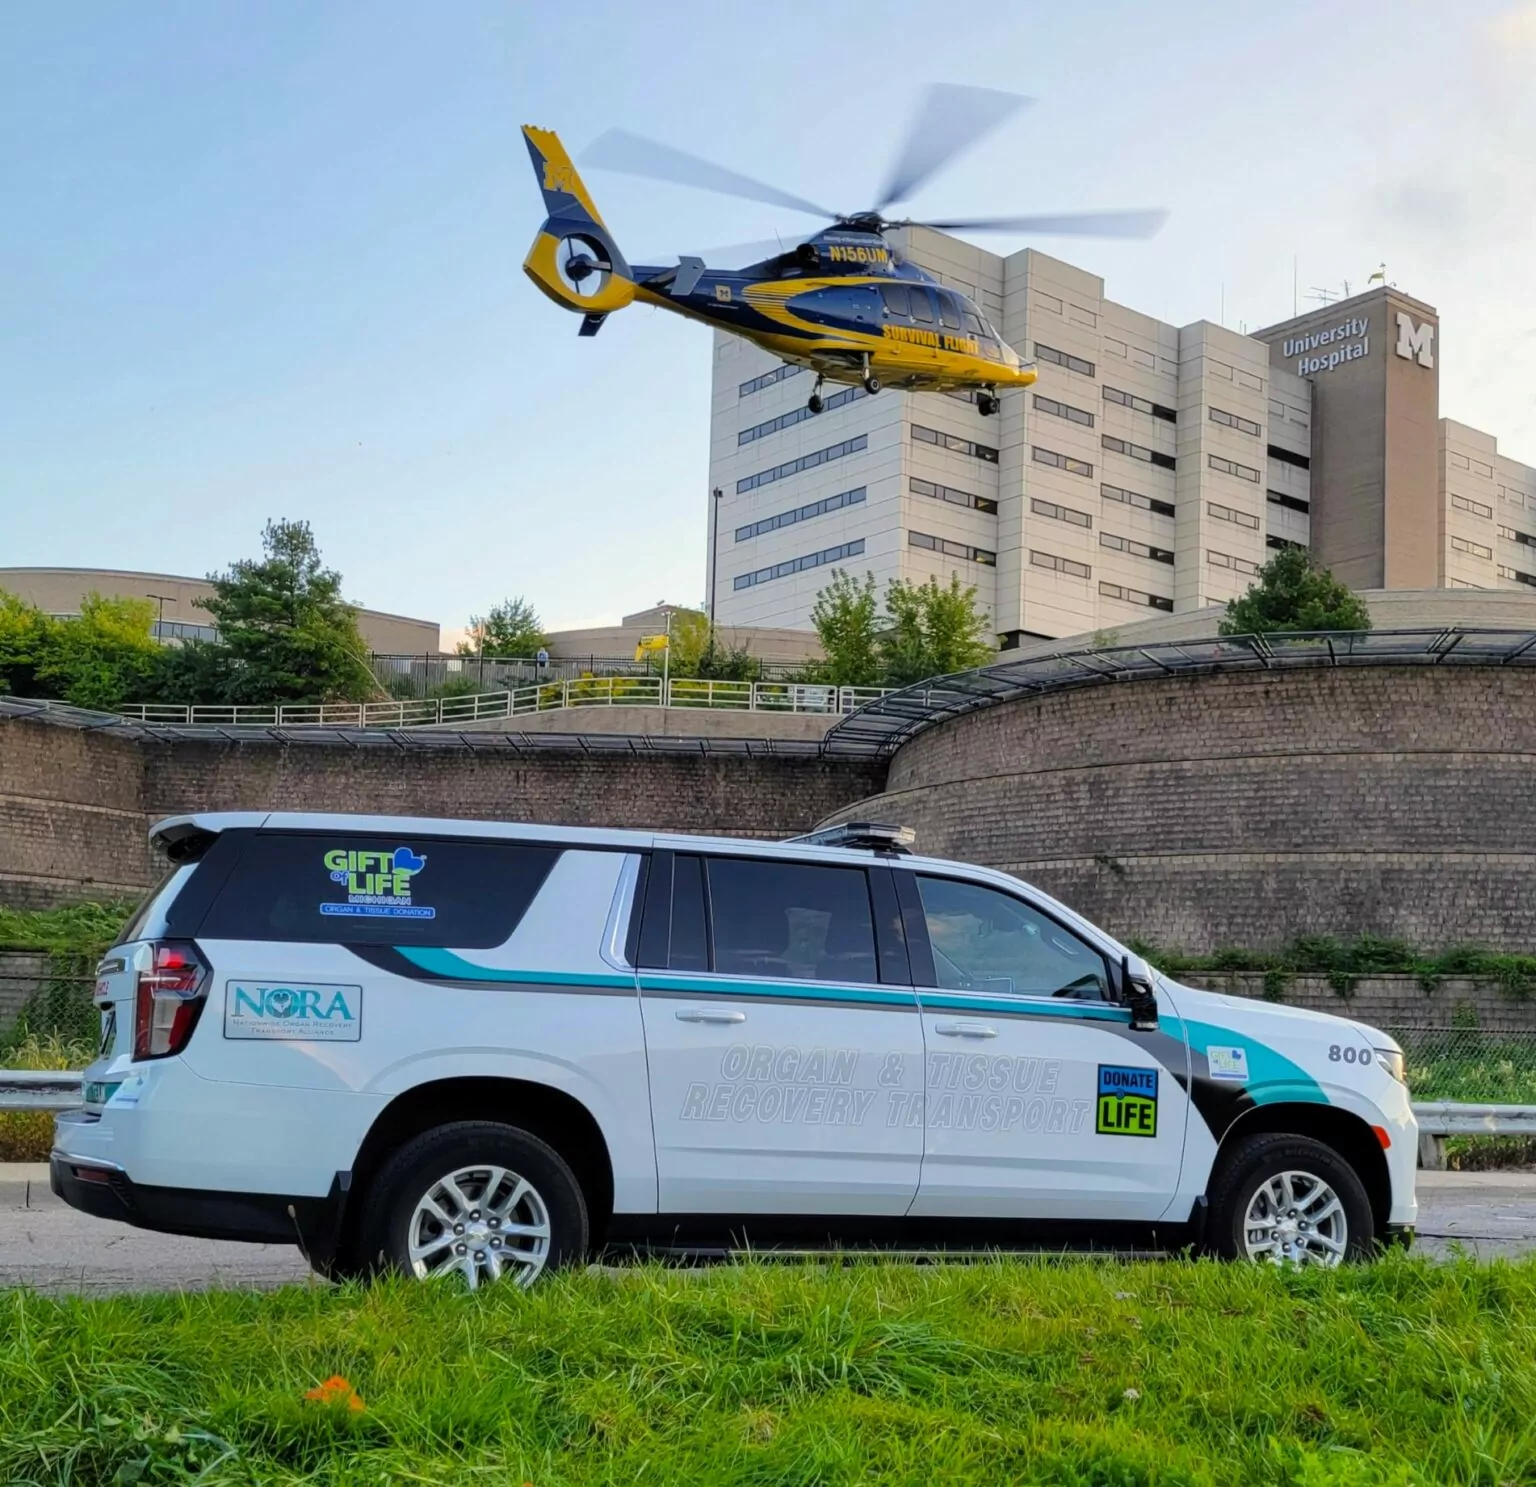 Nationwide Organ Recovery Transport Alliance (NORA) helps Gift of Life and local transplant hospitals move organs and medical teams around the state.